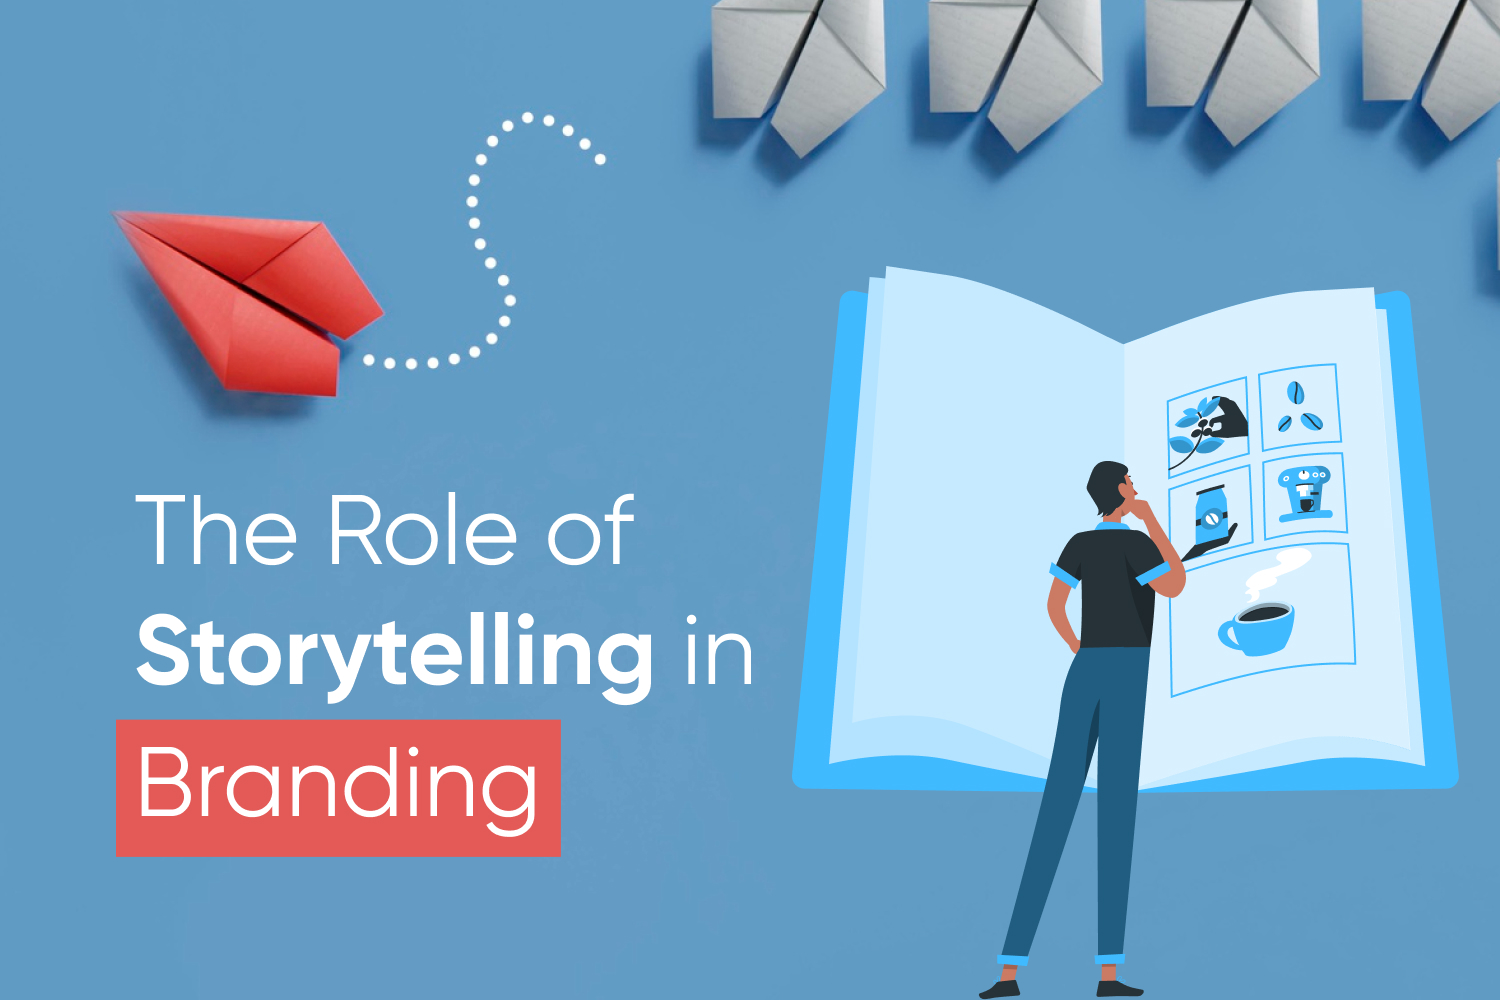 The Role of Storytelling in Branding